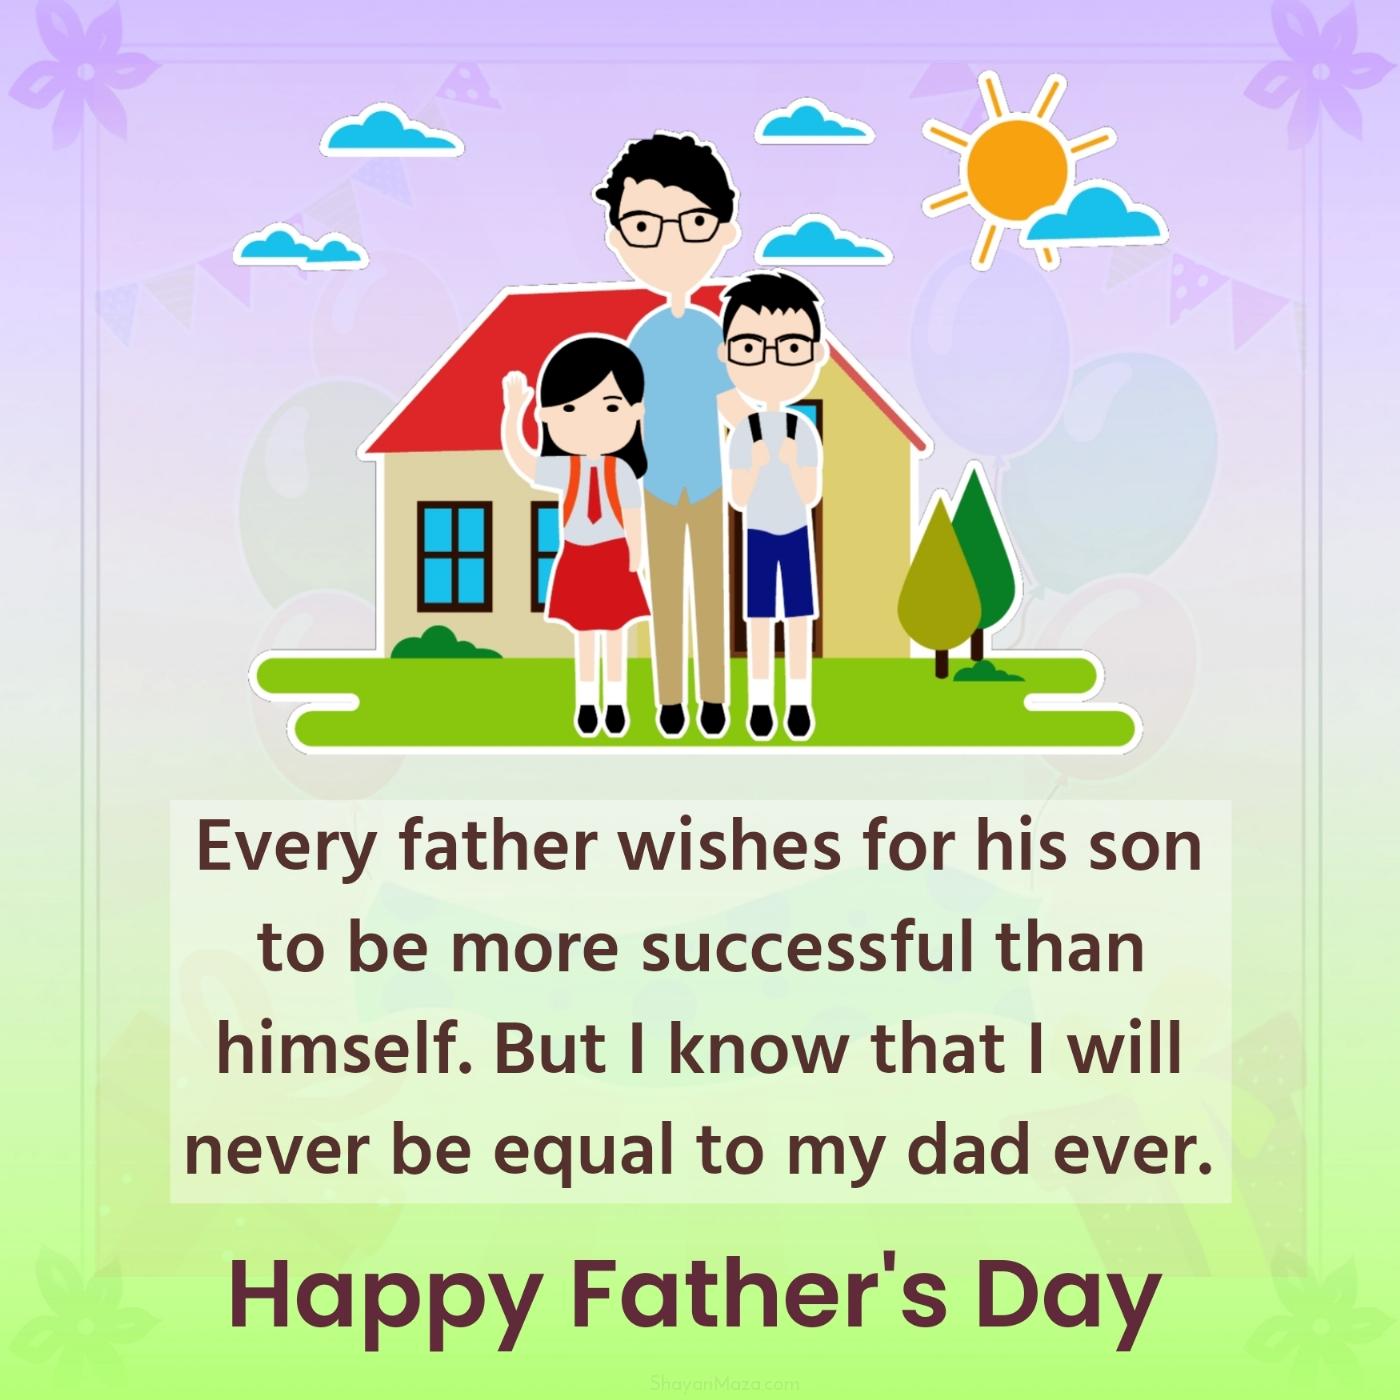 Every father wishes for his son to be more successful